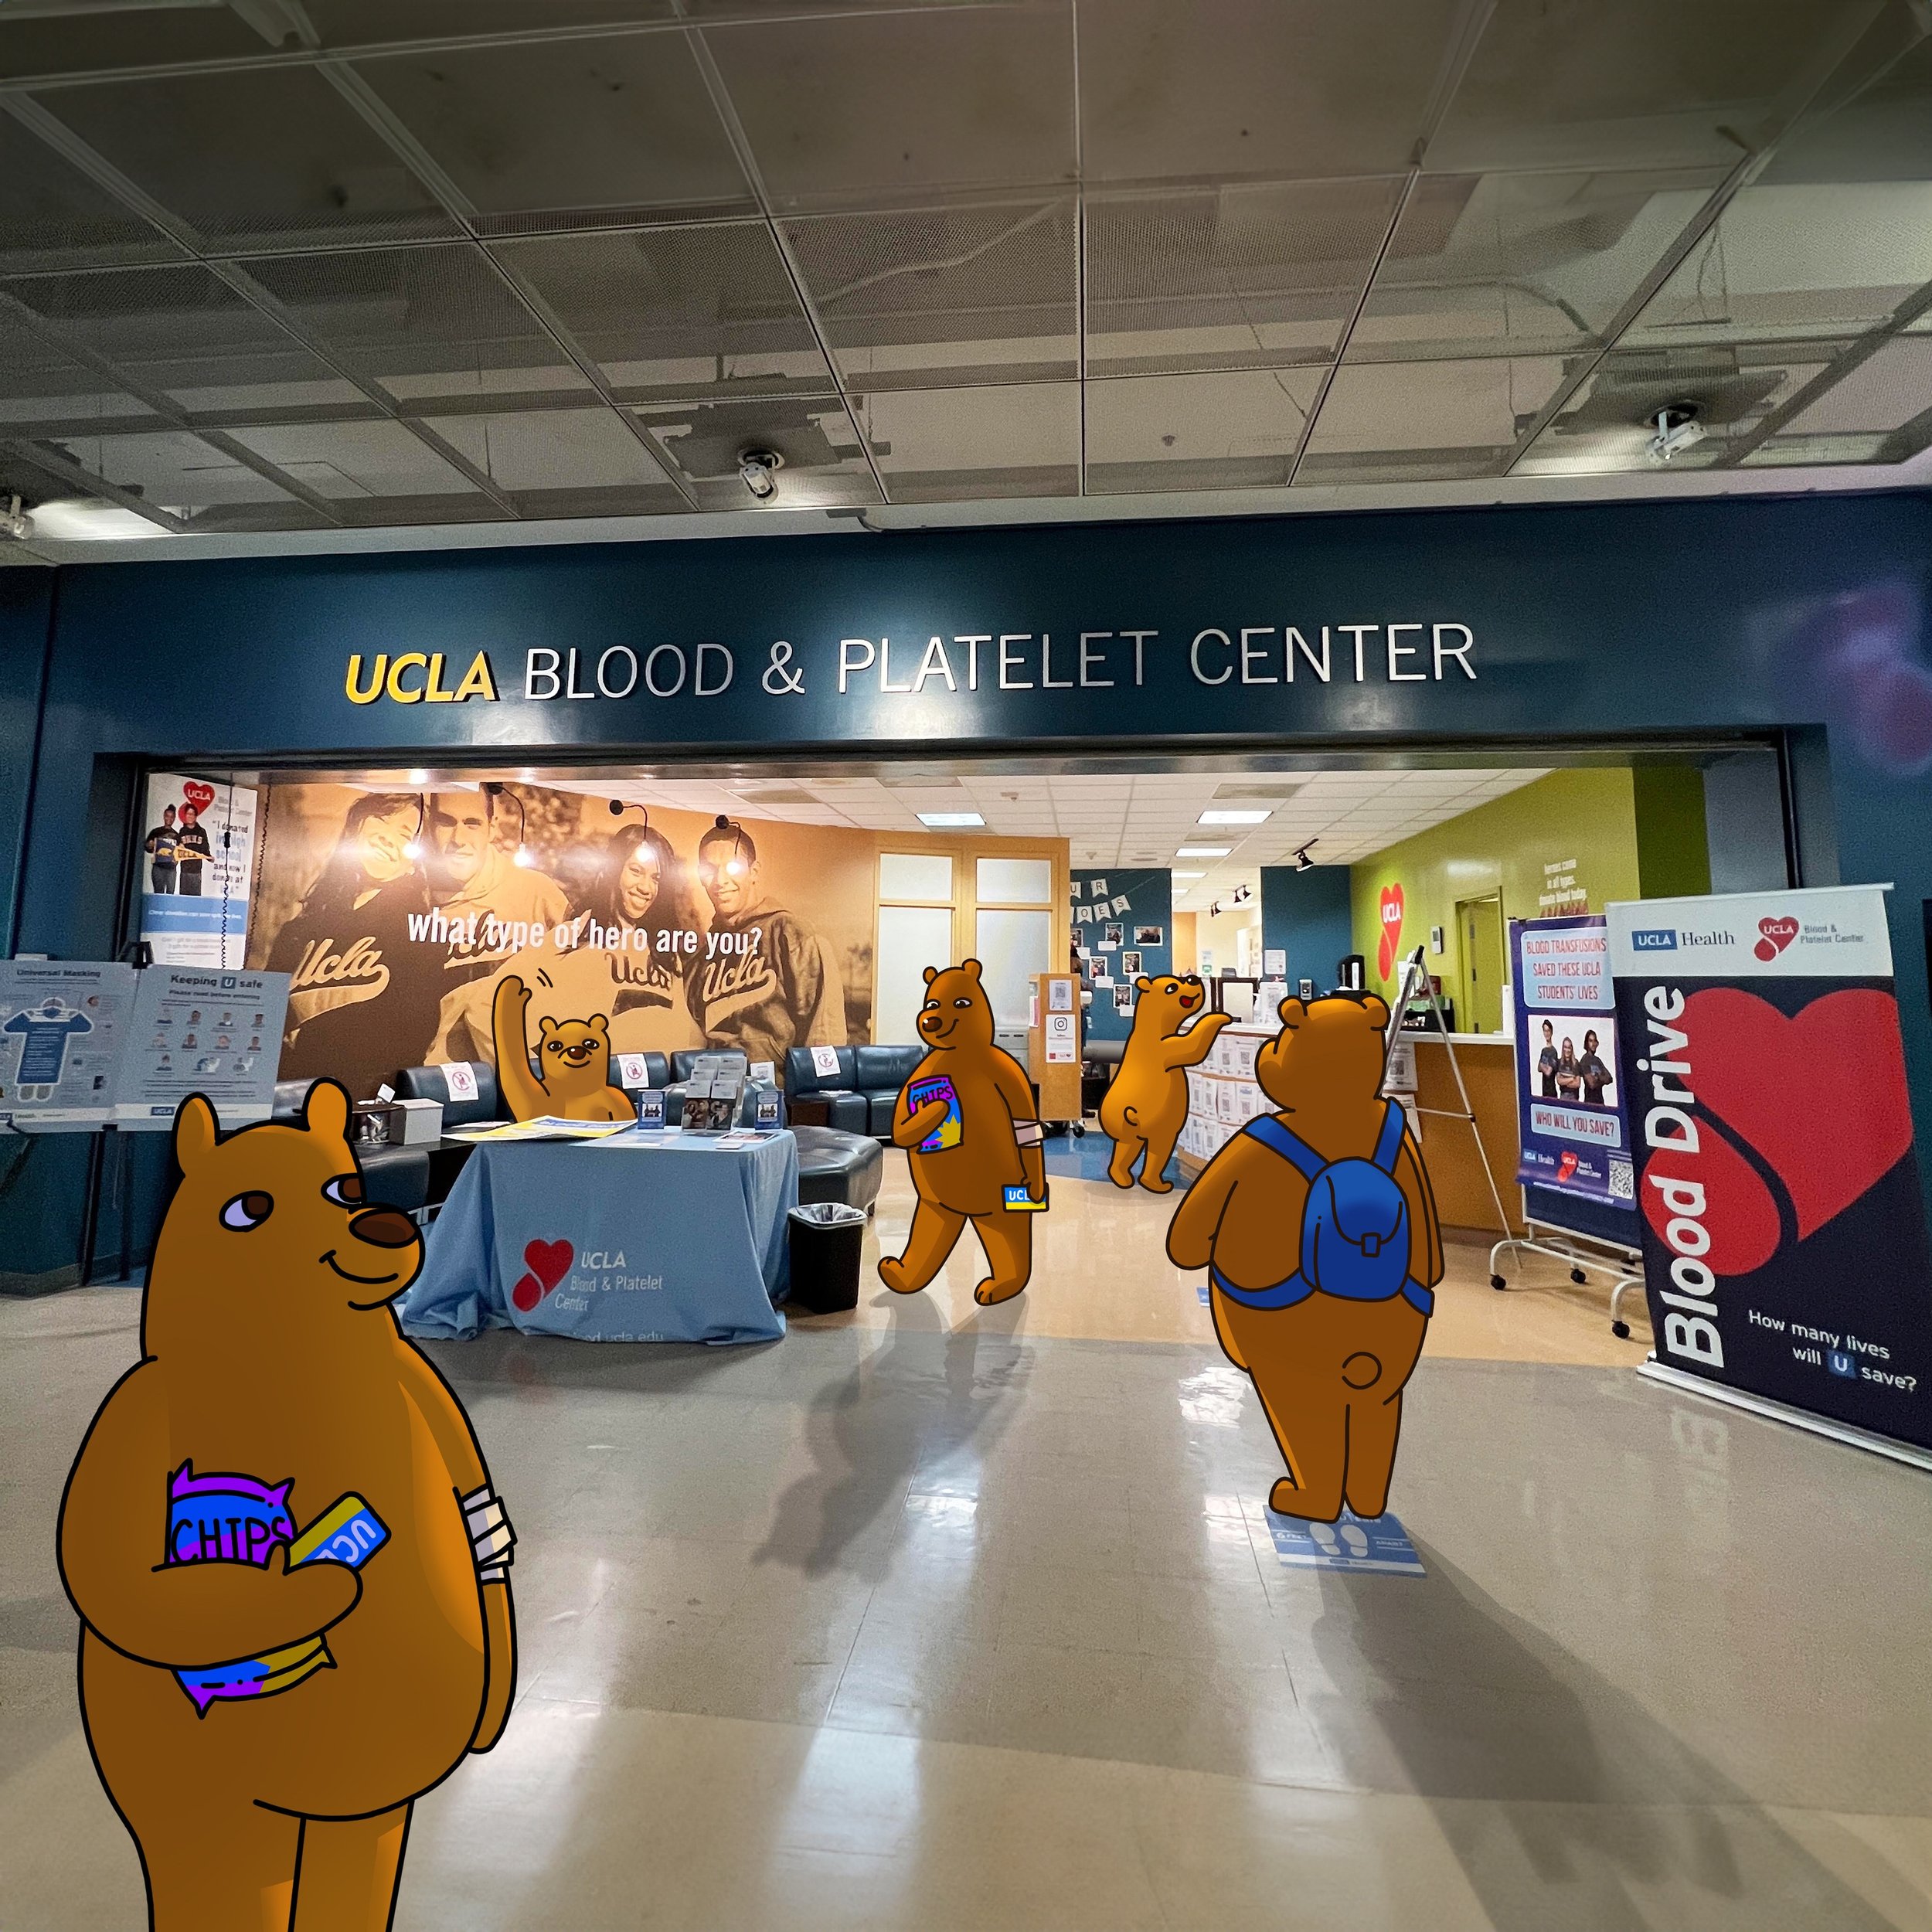 Just cuz it&rsquo;s Week 10 doesn&rsquo;t mean it&rsquo;s too late to donate blood at the UCLA Blood and Platelet Center! Come by, grab a snack, and change a life! Plus, check out the perks* that you can receive in exchange for your generous donation